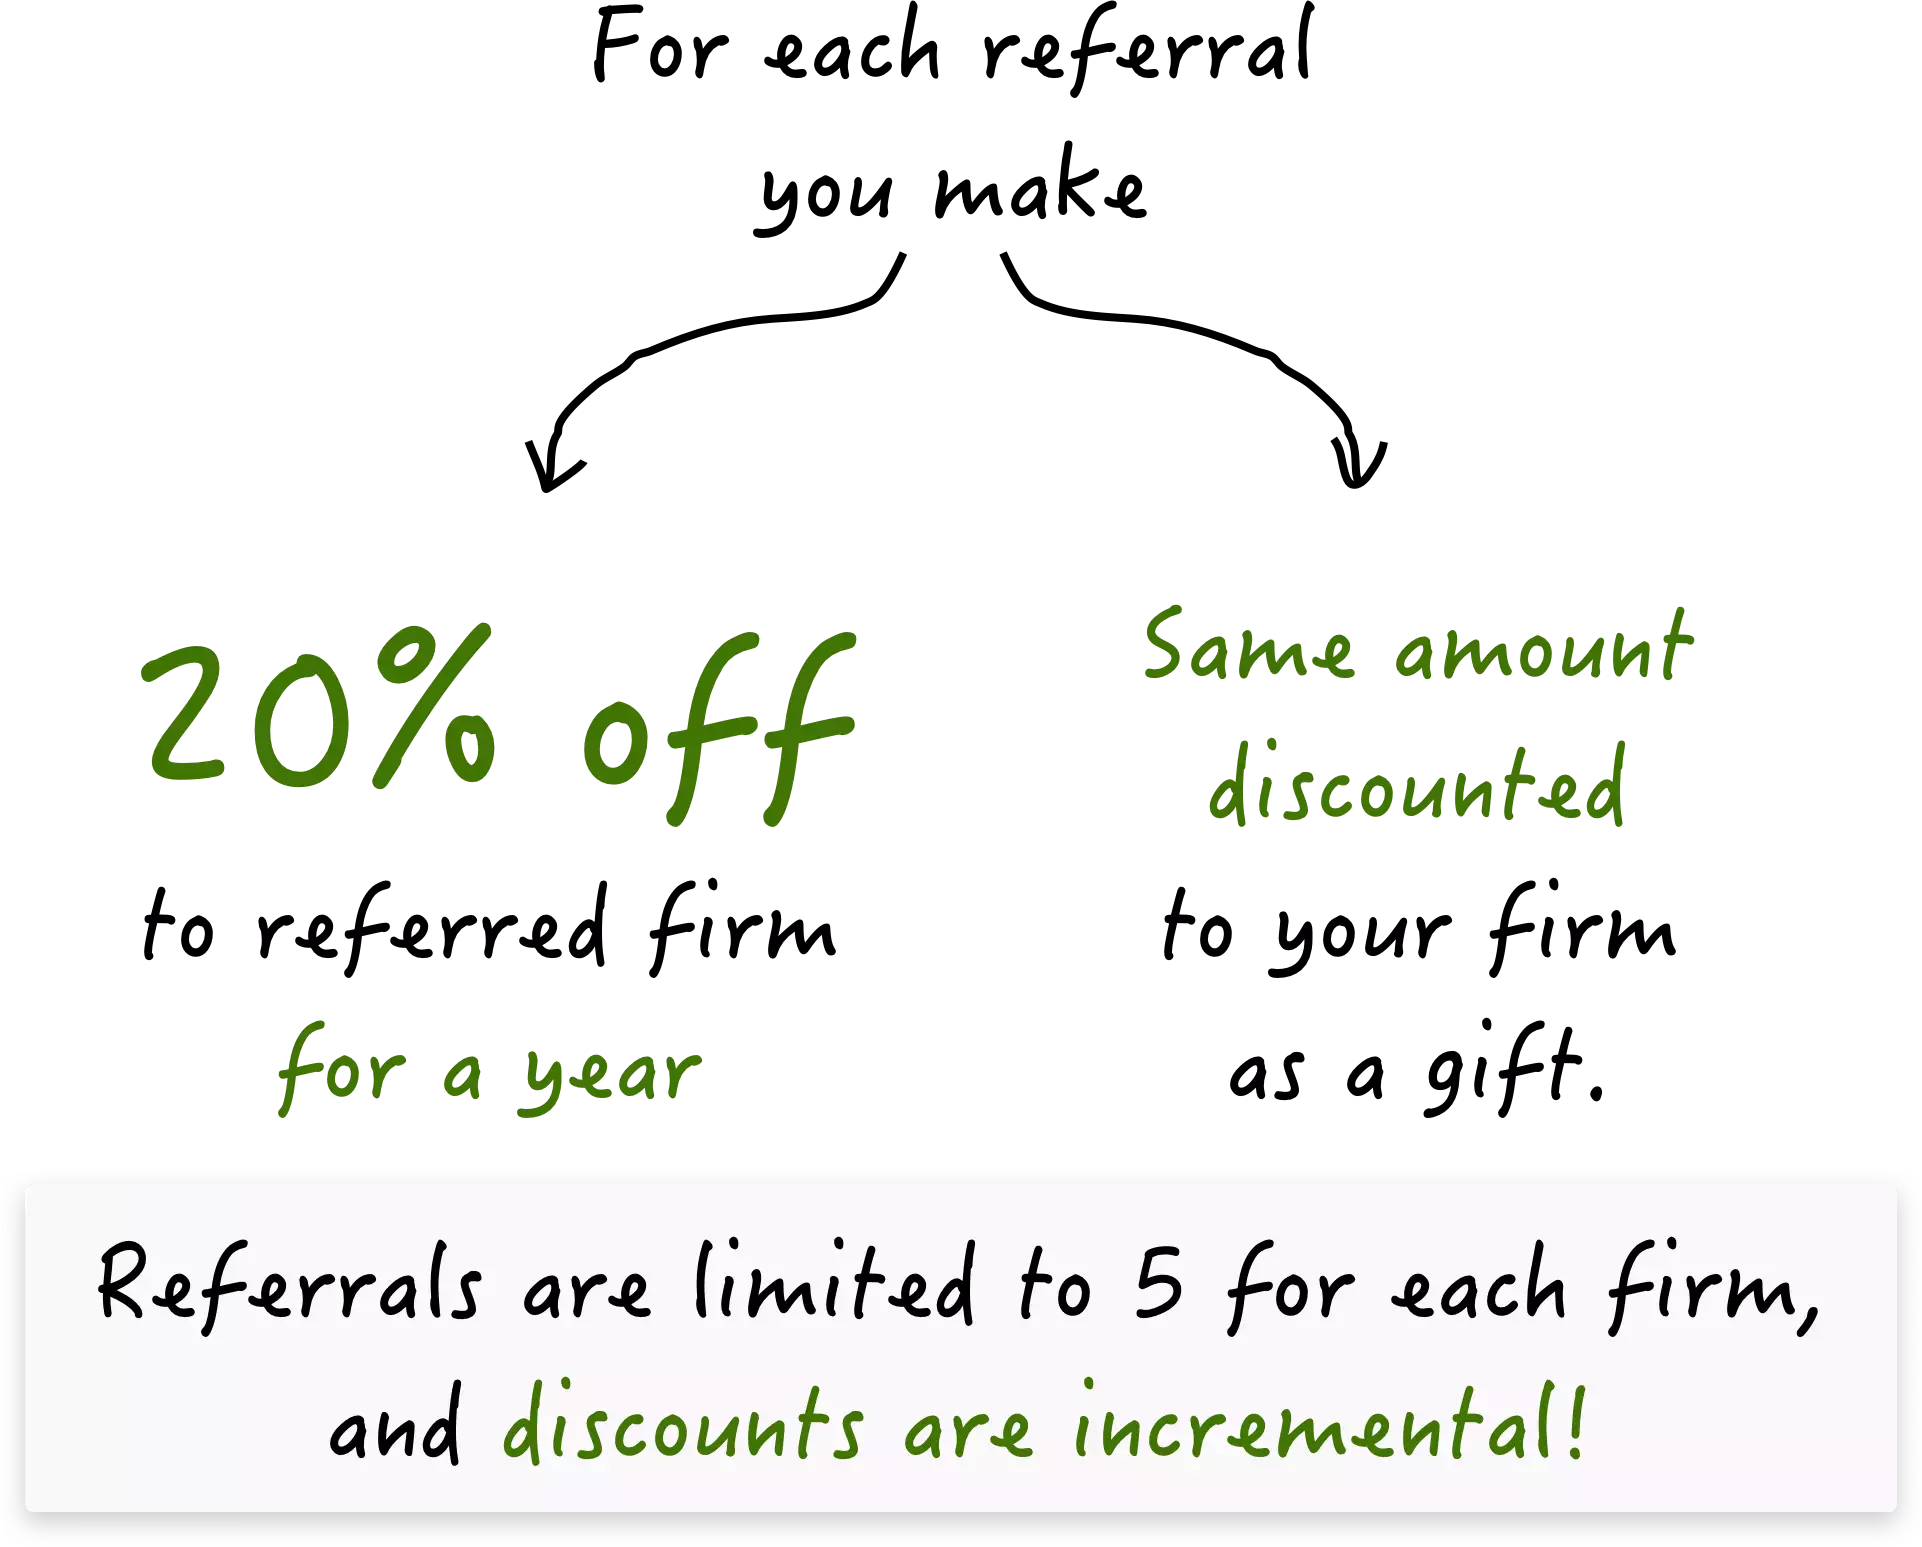 Have 20% discount on referrals and give 20% as well